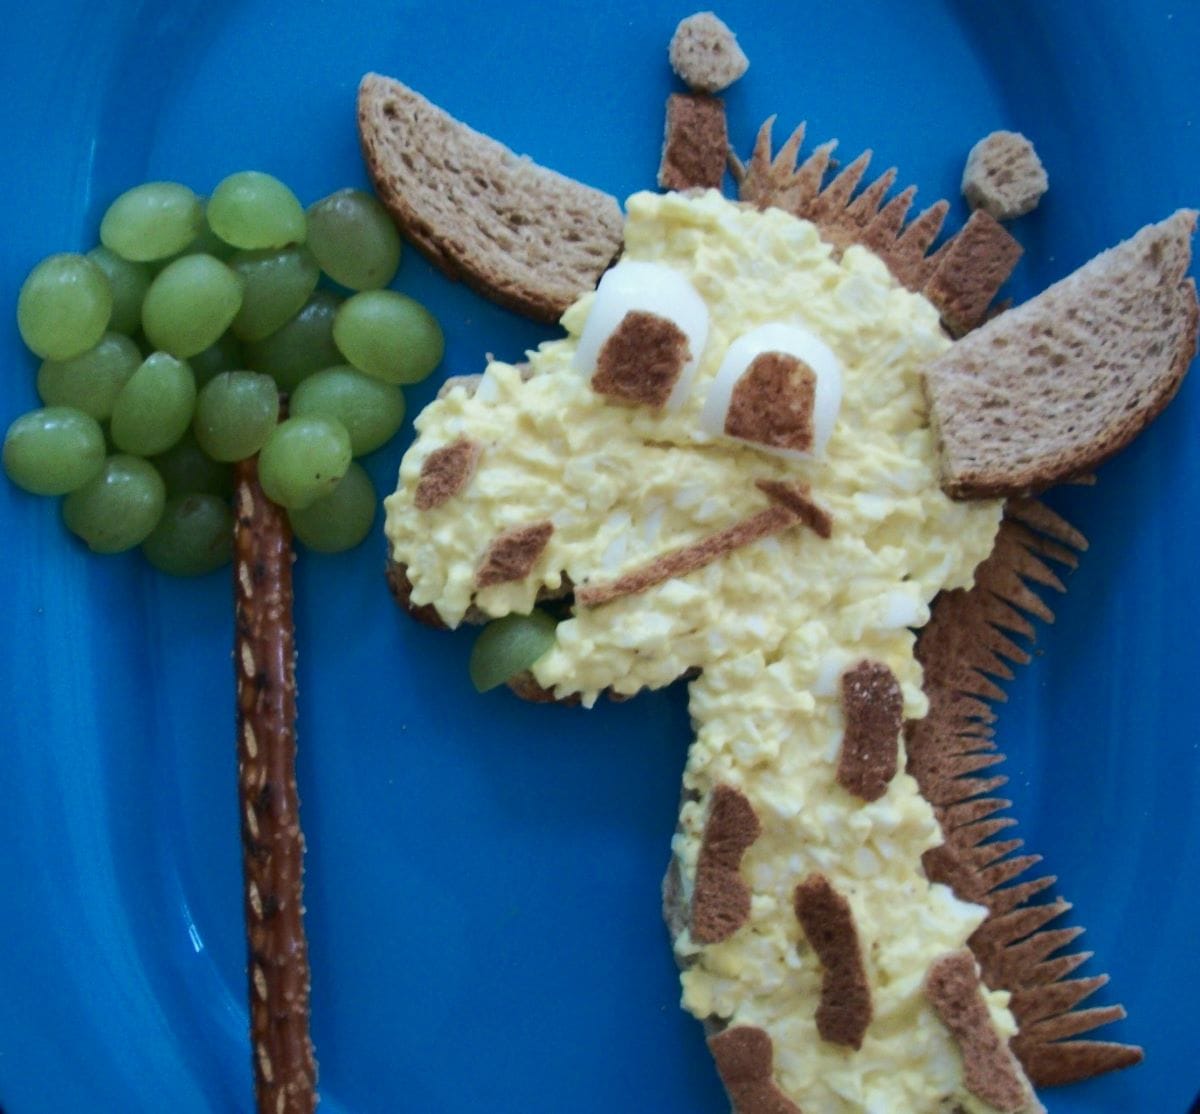 giraffe lunch with an open faced egg salad sandwich that looks like a griffe on a blue plate